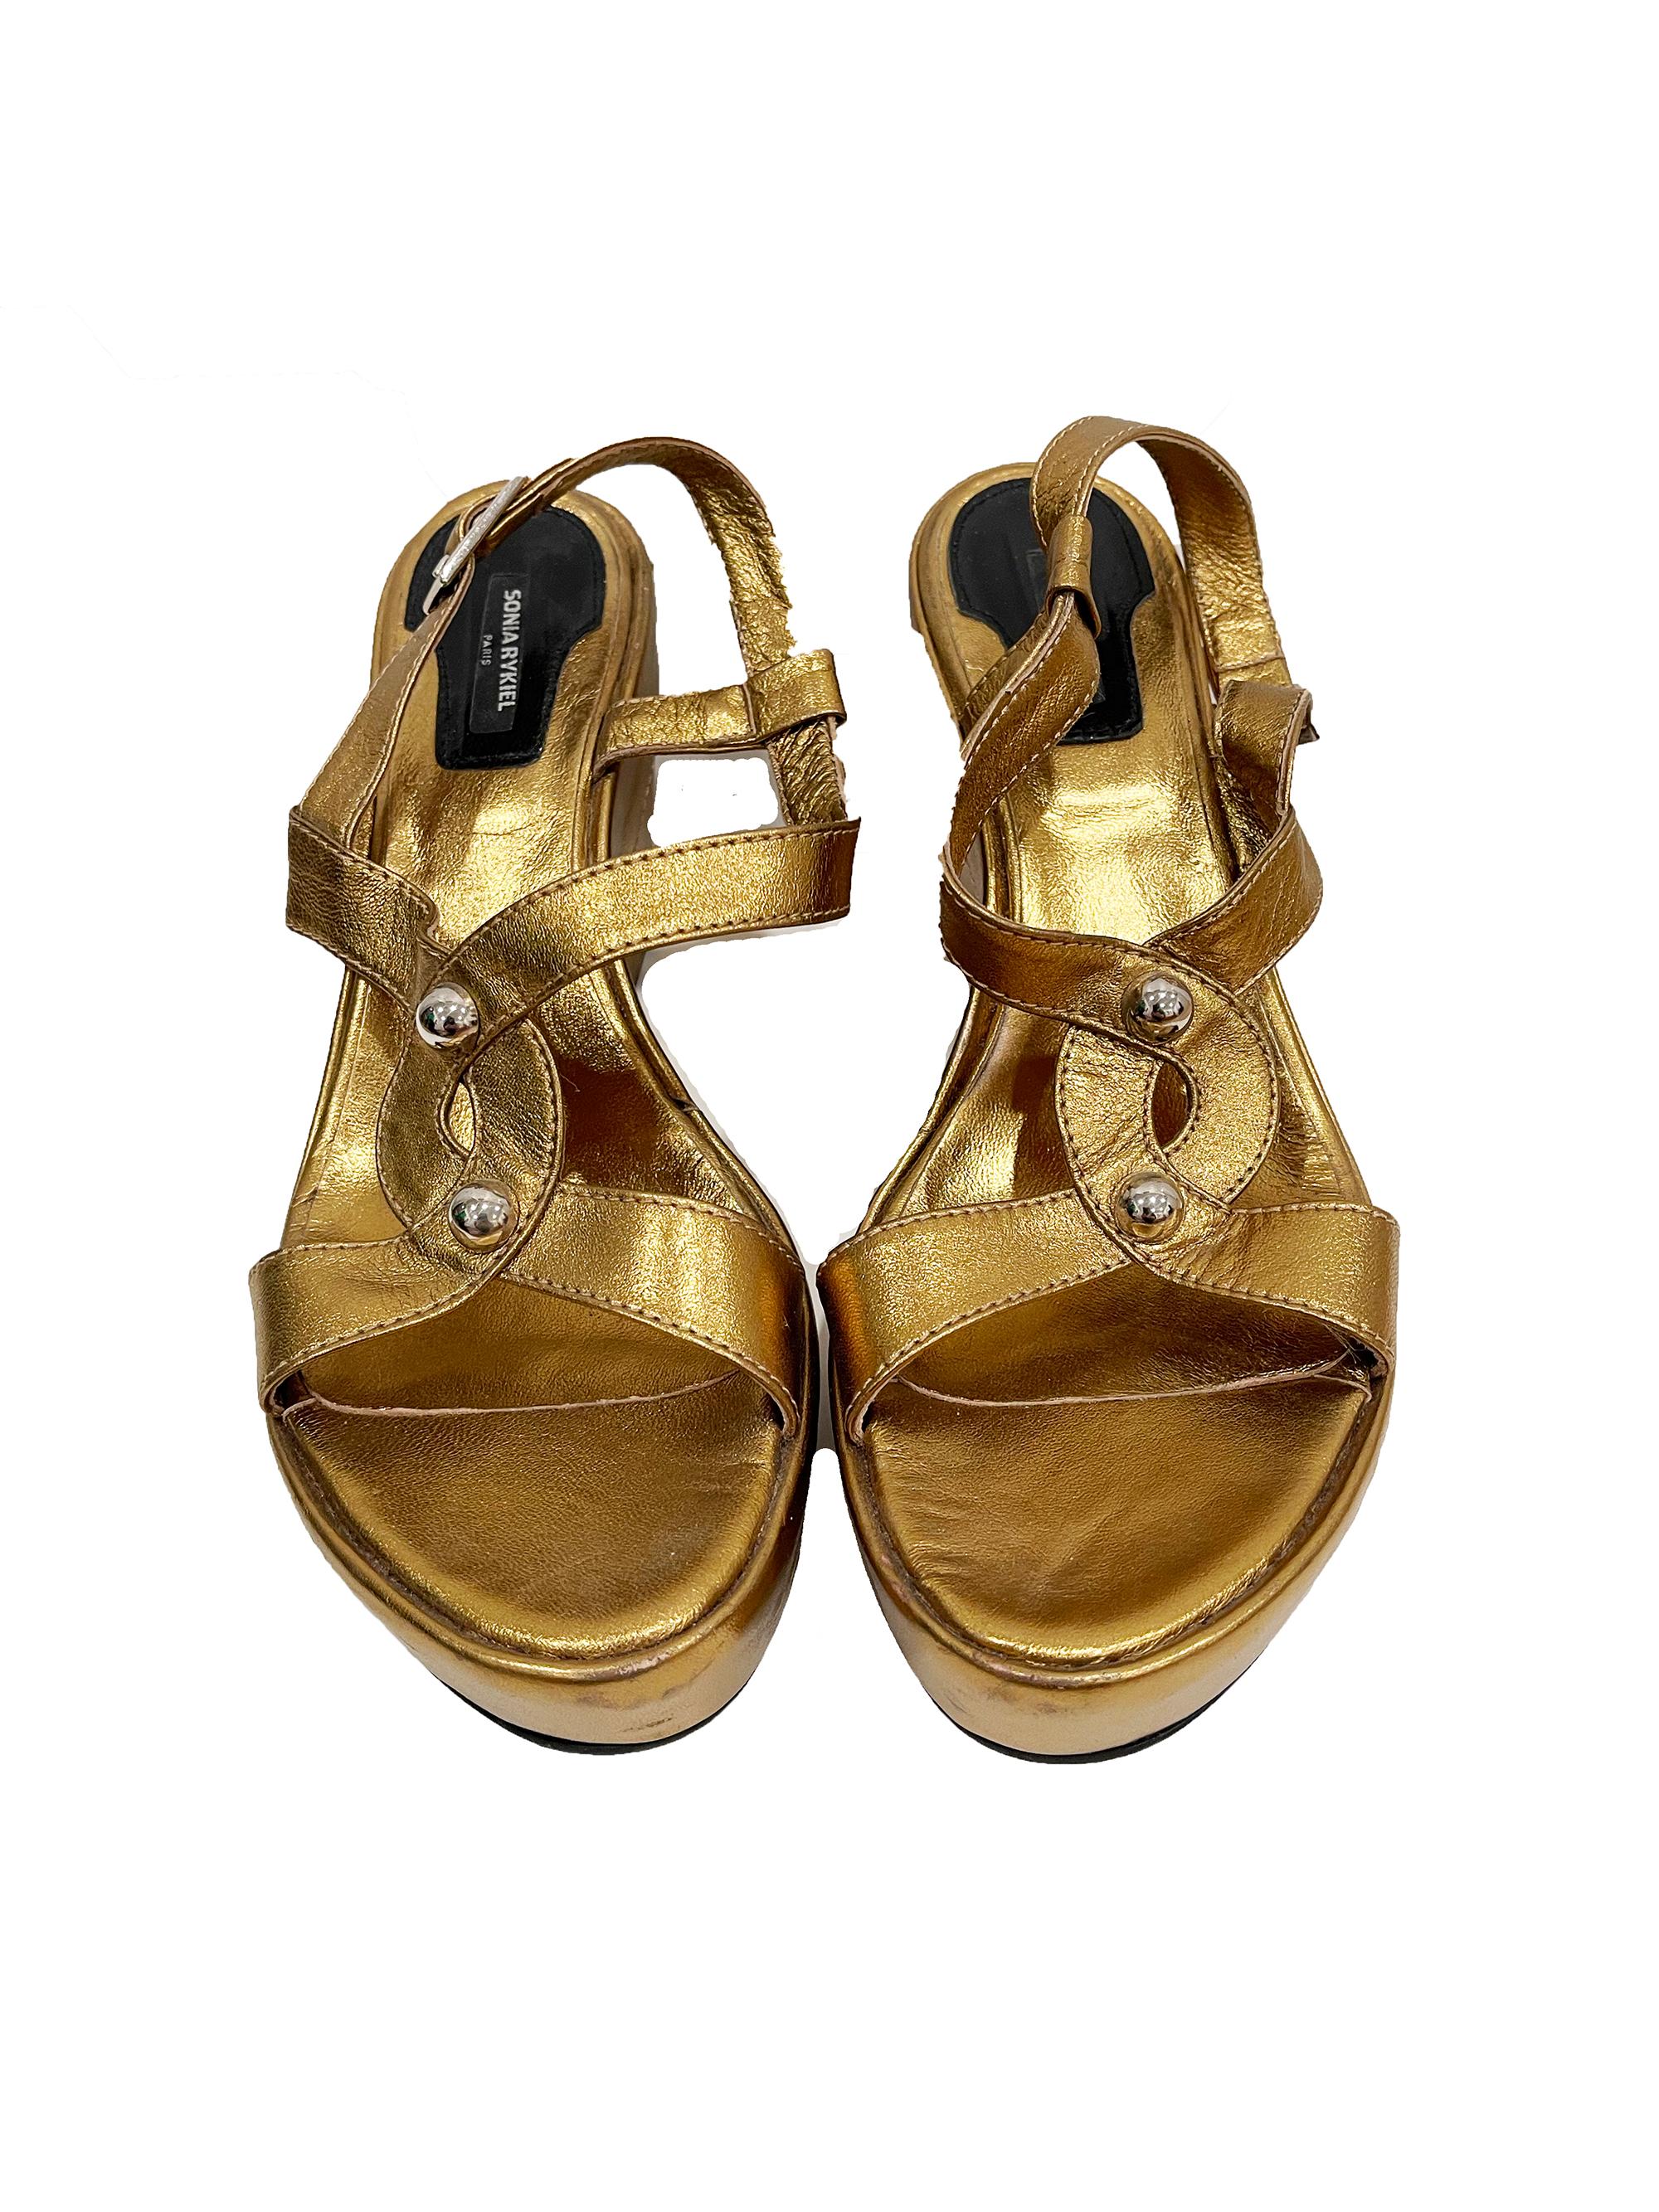 1990s Sonia Rykiel Gold Wedge Sandals
size 39 1/2
Condition; Good all over wear

